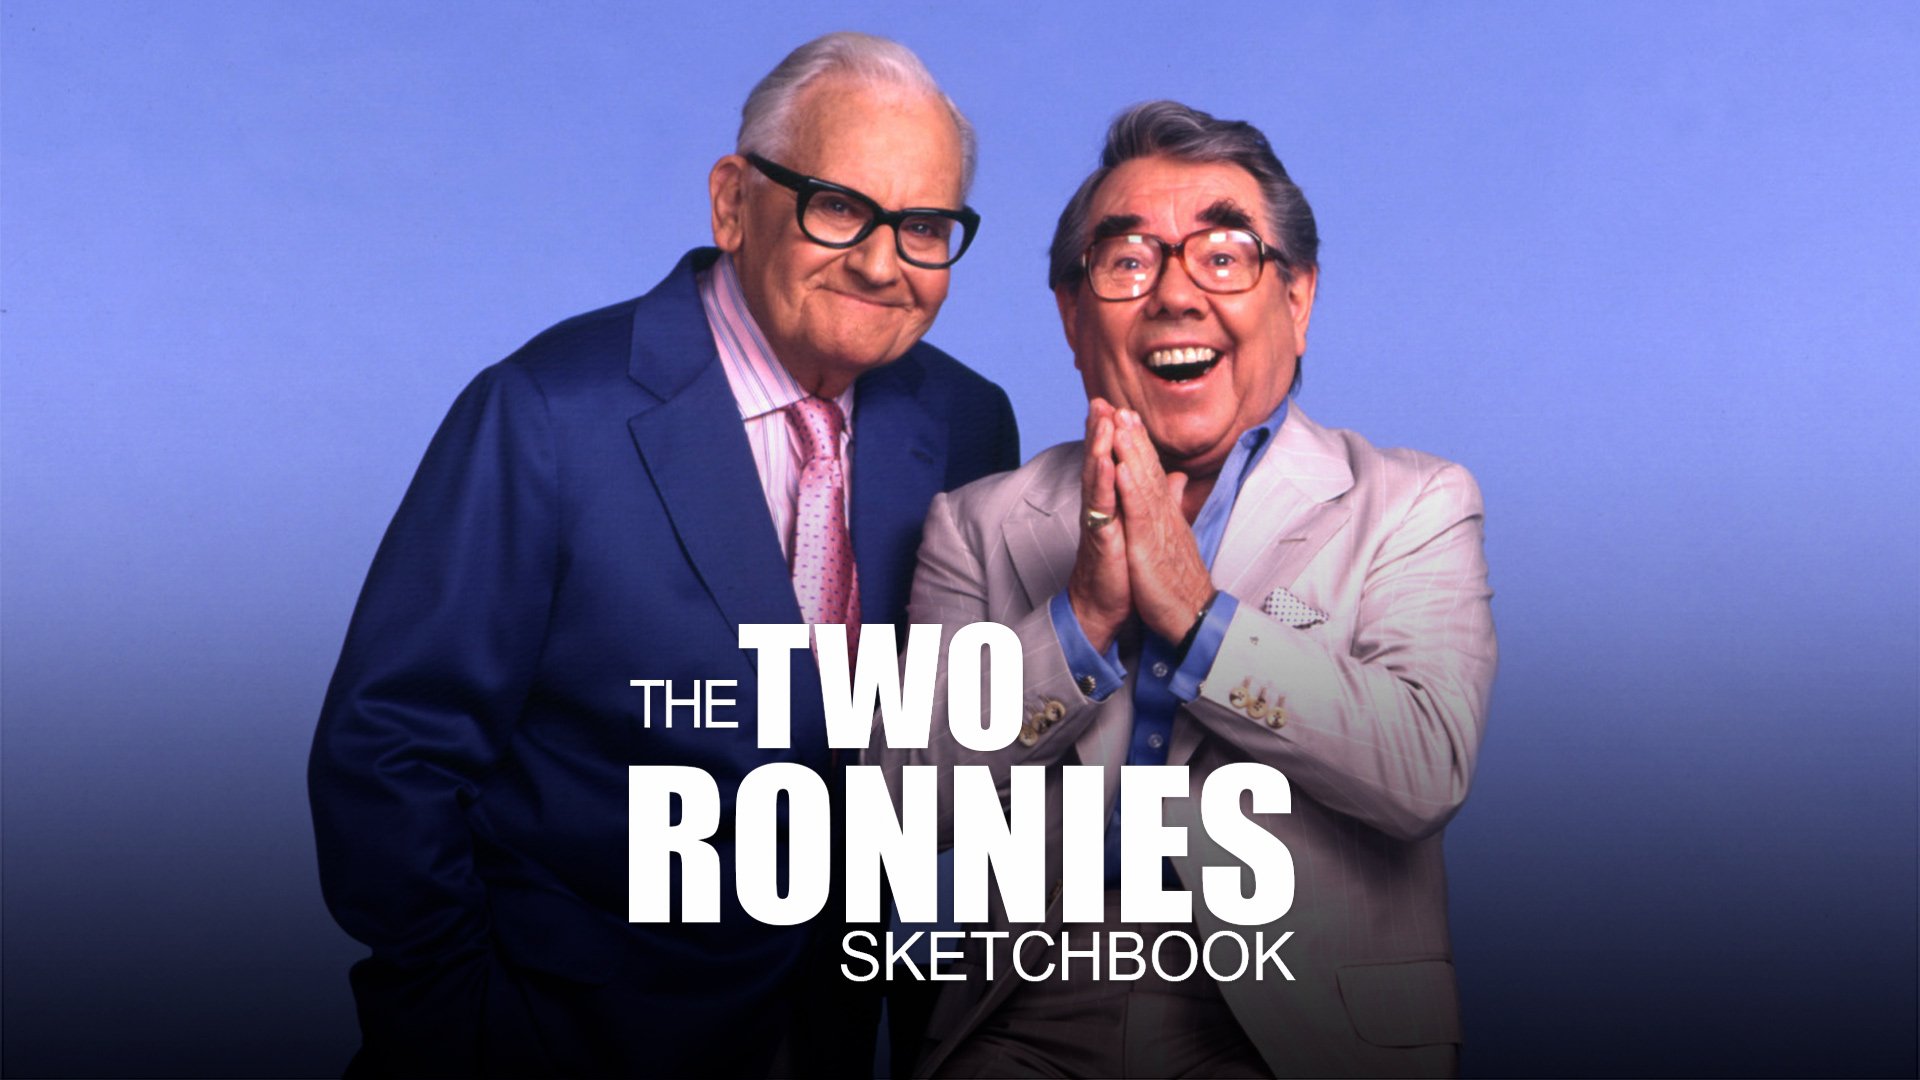 Royal Mail to honour Two Ronnies with stamp